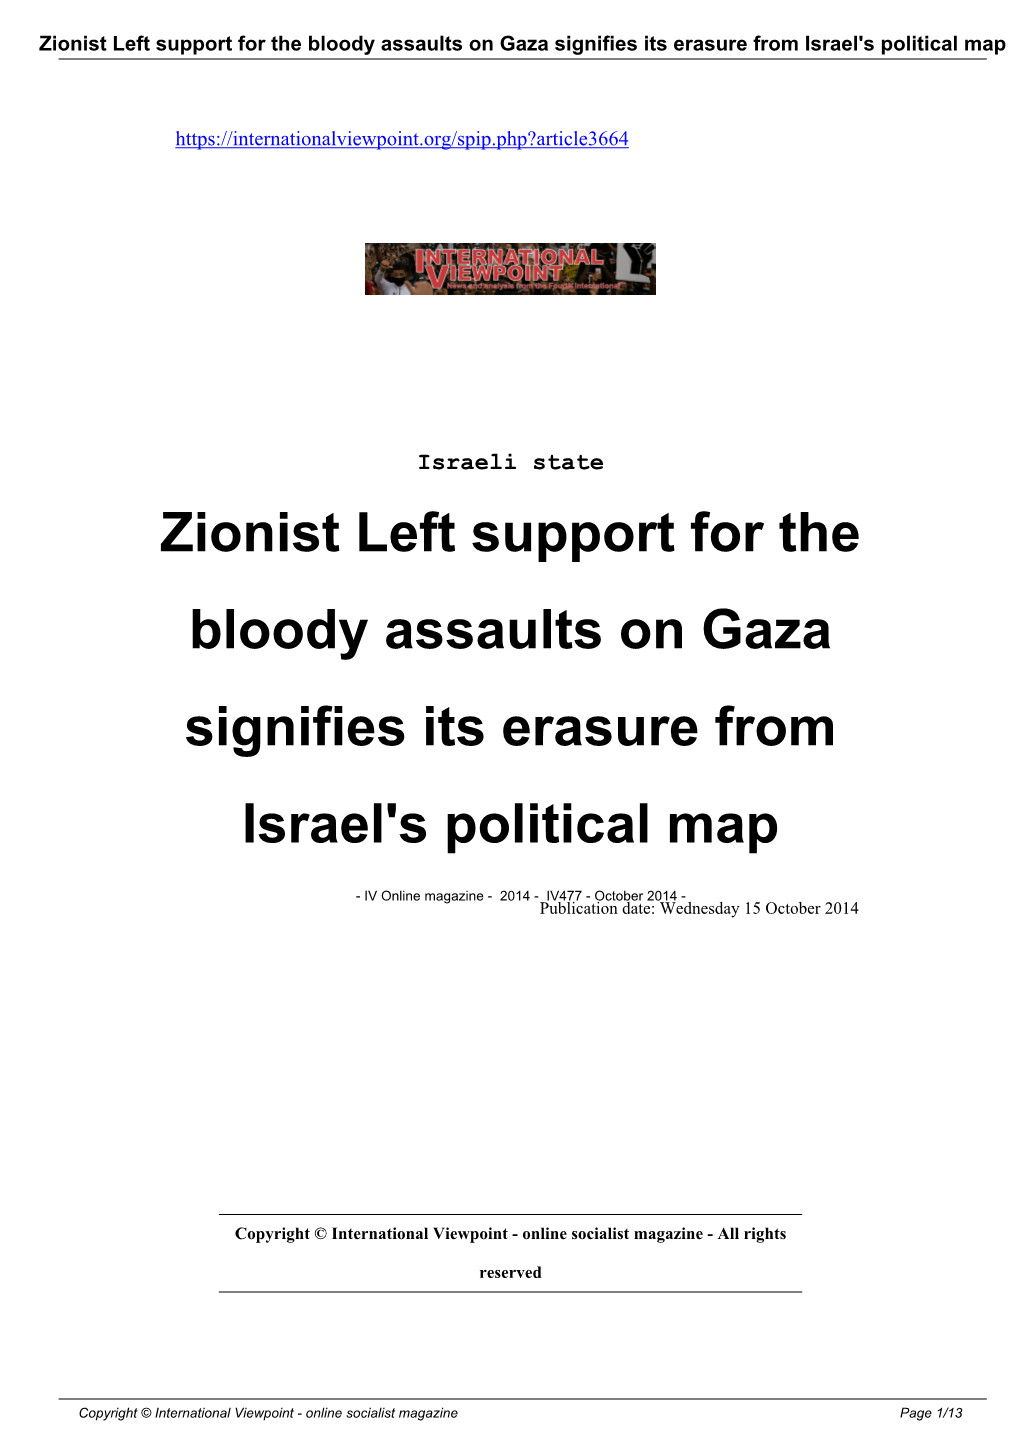 Zionist Left Support for the Bloody Assaults on Gaza Signifies Its Erasure from Israel's Political Map